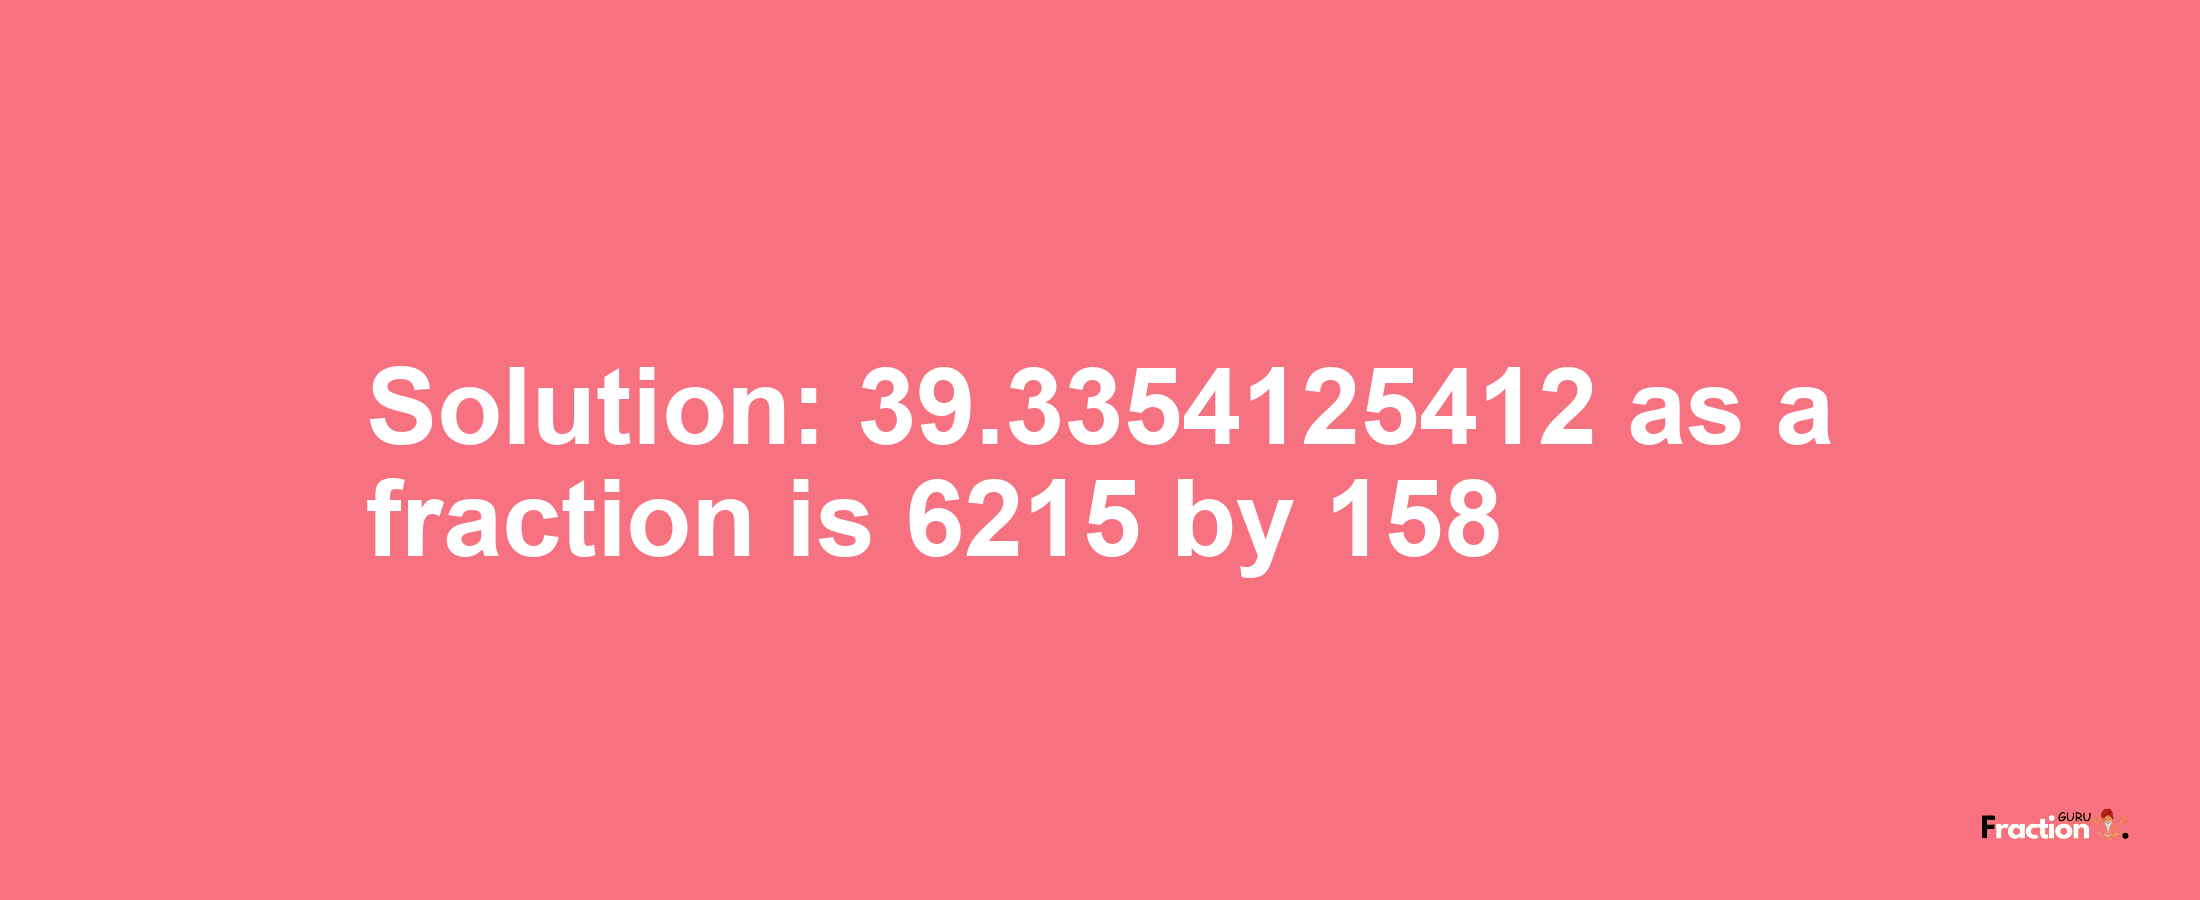 Solution:39.3354125412 as a fraction is 6215/158